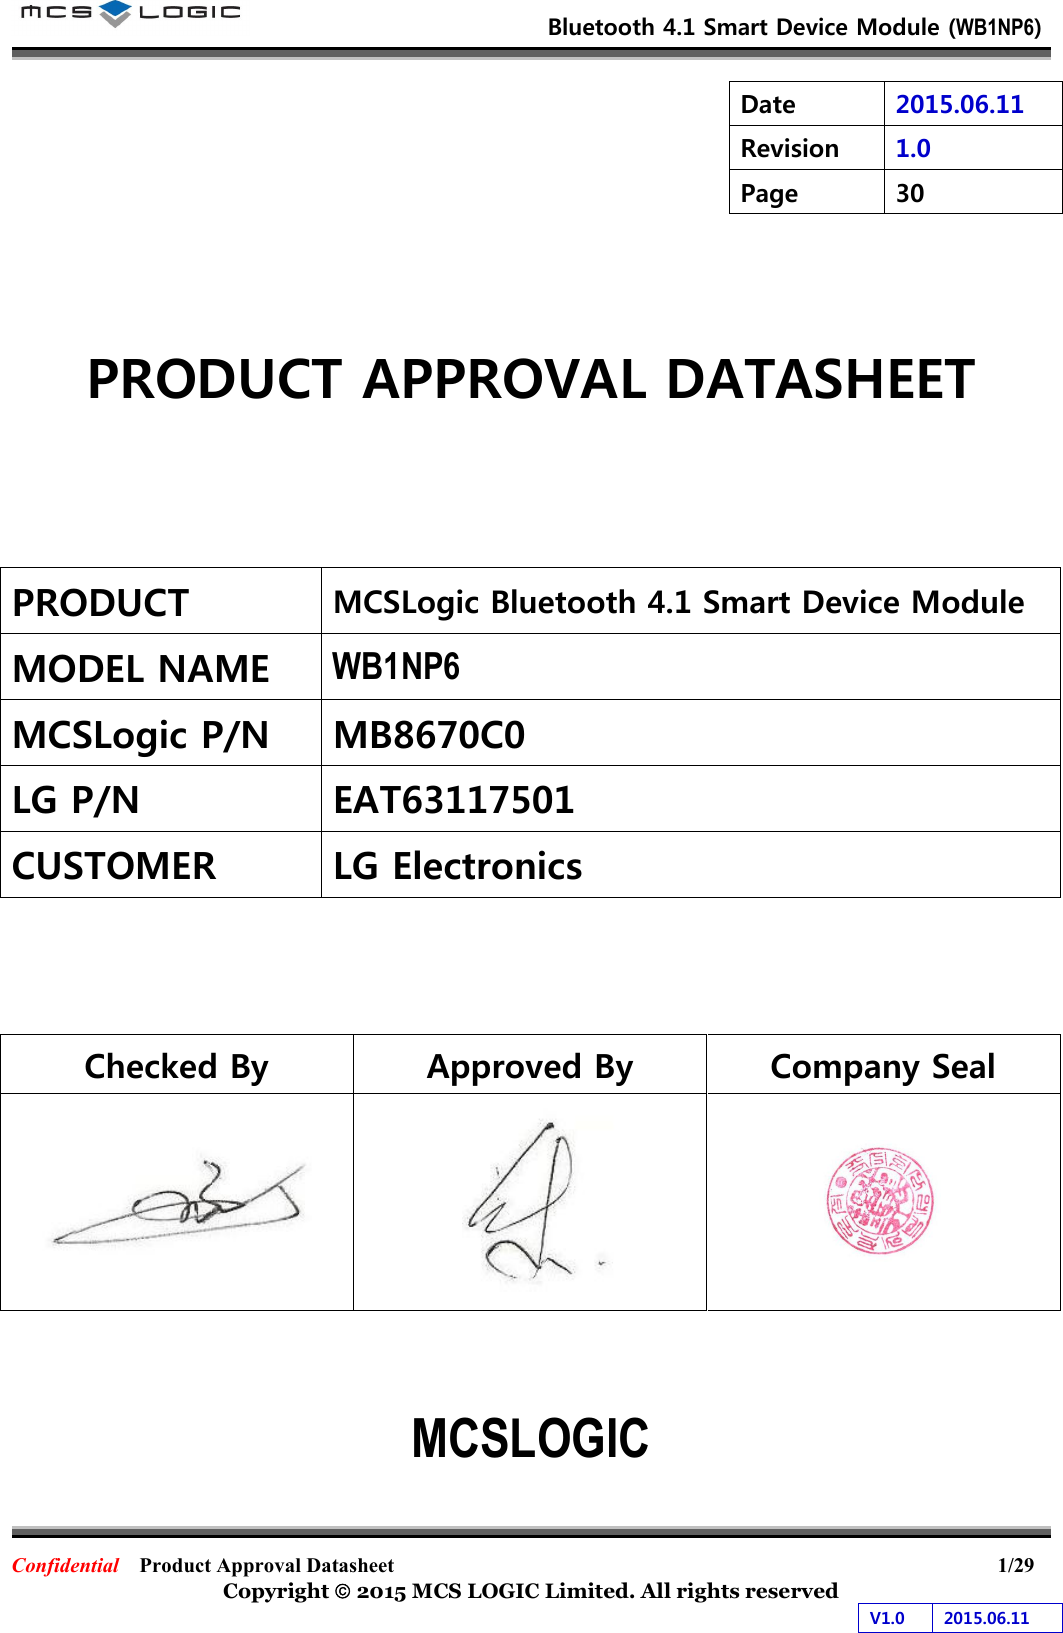                           Bluetooth 4.1 Smart Device Module (WB1NP6)                        Confidential    Product Approval Datasheet                                                           1/29 Copyright  2015 MCS LOGIC Limited. All rights reserved V1.0  2015.06.11  Date  2015.06.11 Revision  1.0 Page  30    PRODUCT APPROVAL DATASHEET     PRODUCT MCSLogic Bluetooth 4.1 Smart Device Module MODEL NAME WB1NP6 MCSLogic P/N  MB8670C0 LG P/N  EAT63117501 CUSTOMER LG Electronics    Checked By  Approved By  Company Seal        MCSLOGIC  